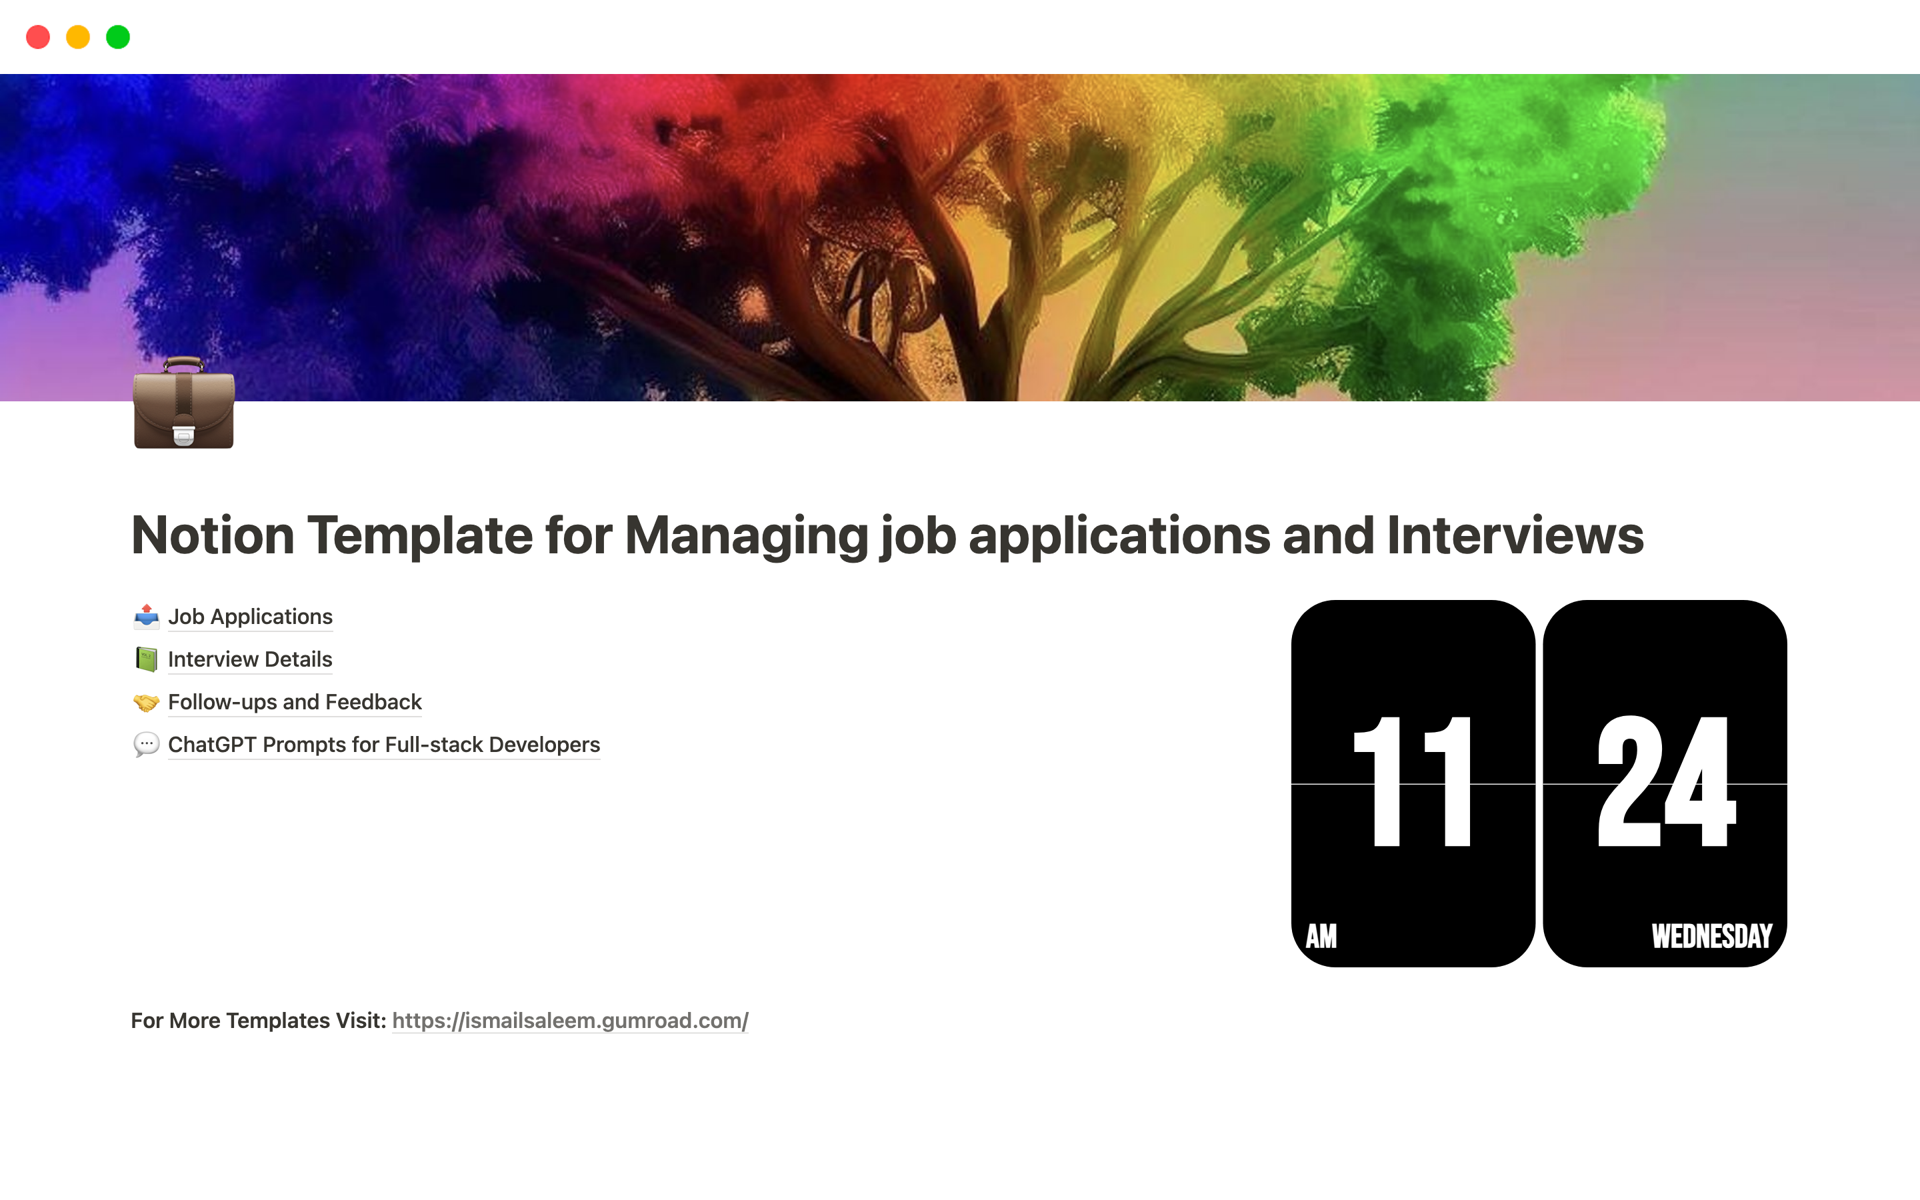 Streamline your job application and interview process with our game-changing Notion Template. Effortlessly track applications, deadlines, interview details, and follow-ups. 